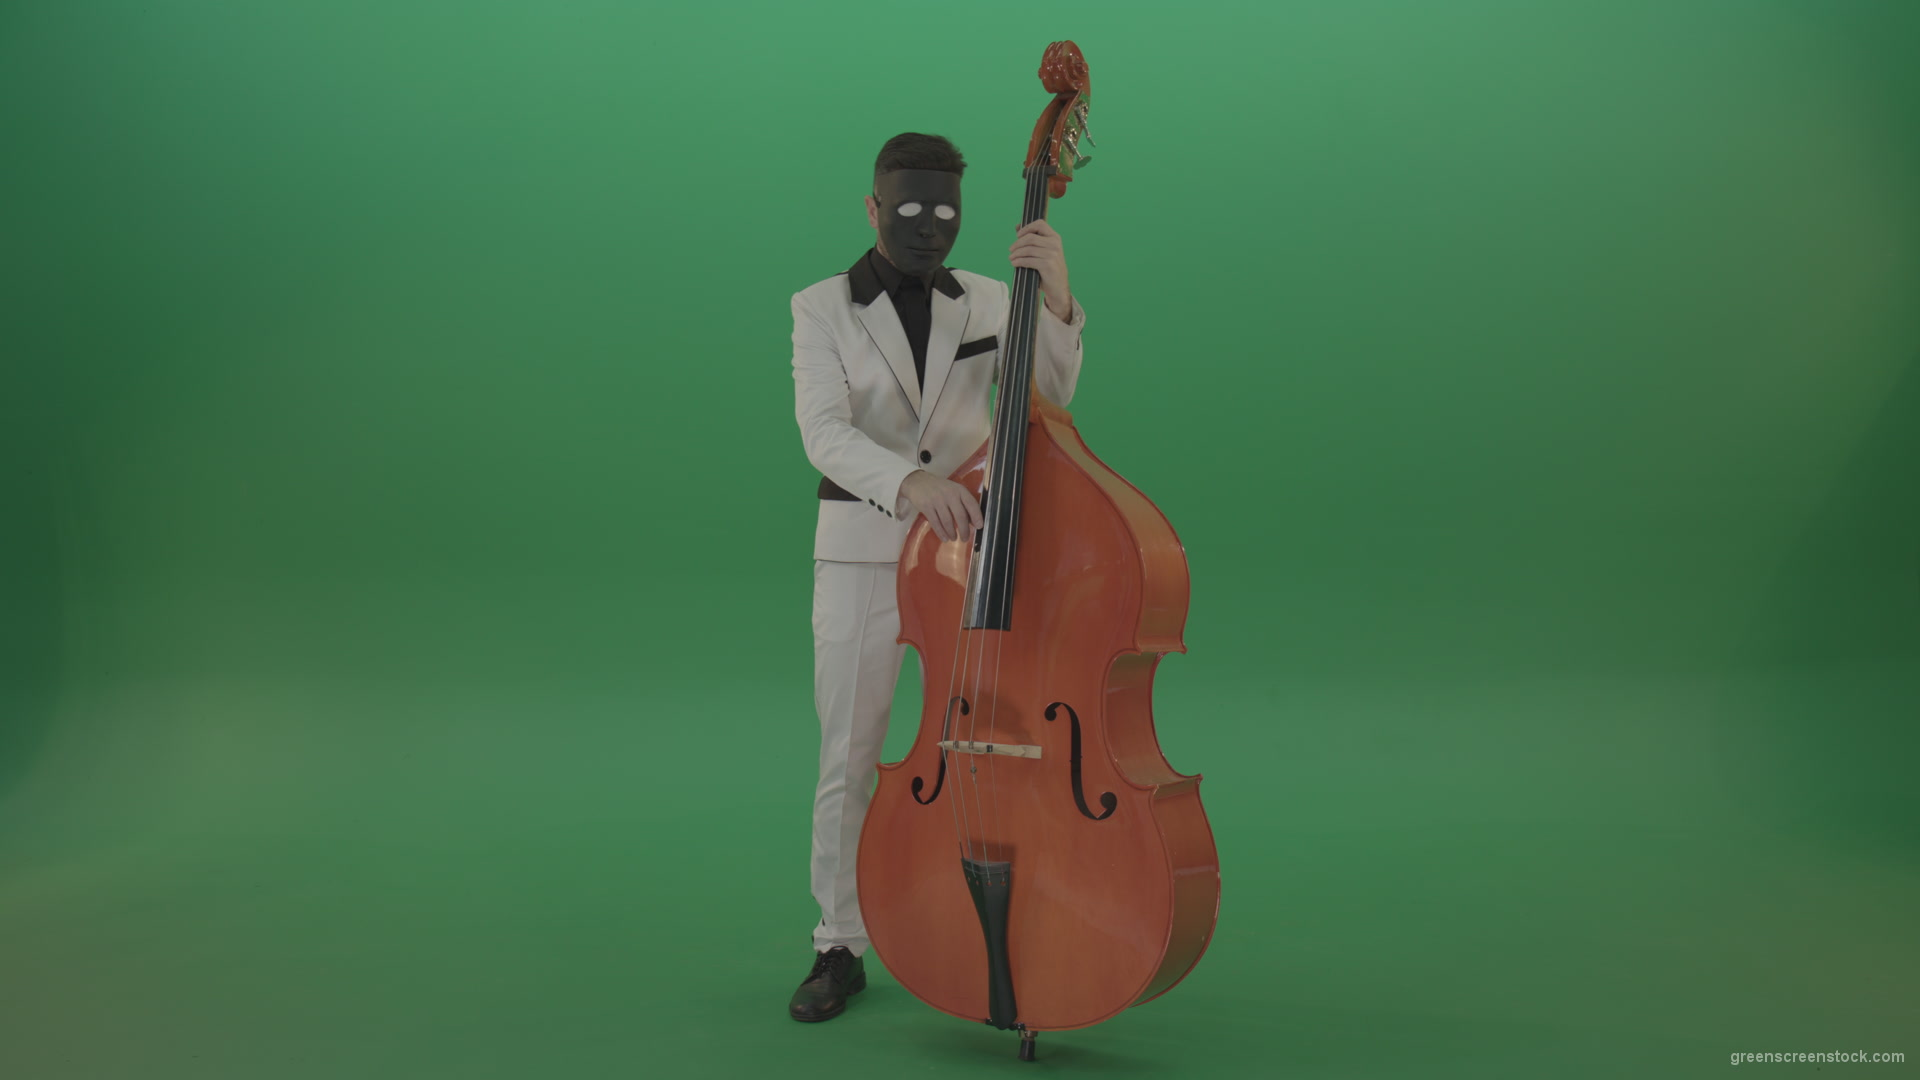 Man-in-white-costume-and-blac-mask-play-jazz-music-on-double-bass-orchestra-music-instument-isolated-on-green-screen_002 Green Screen Stock